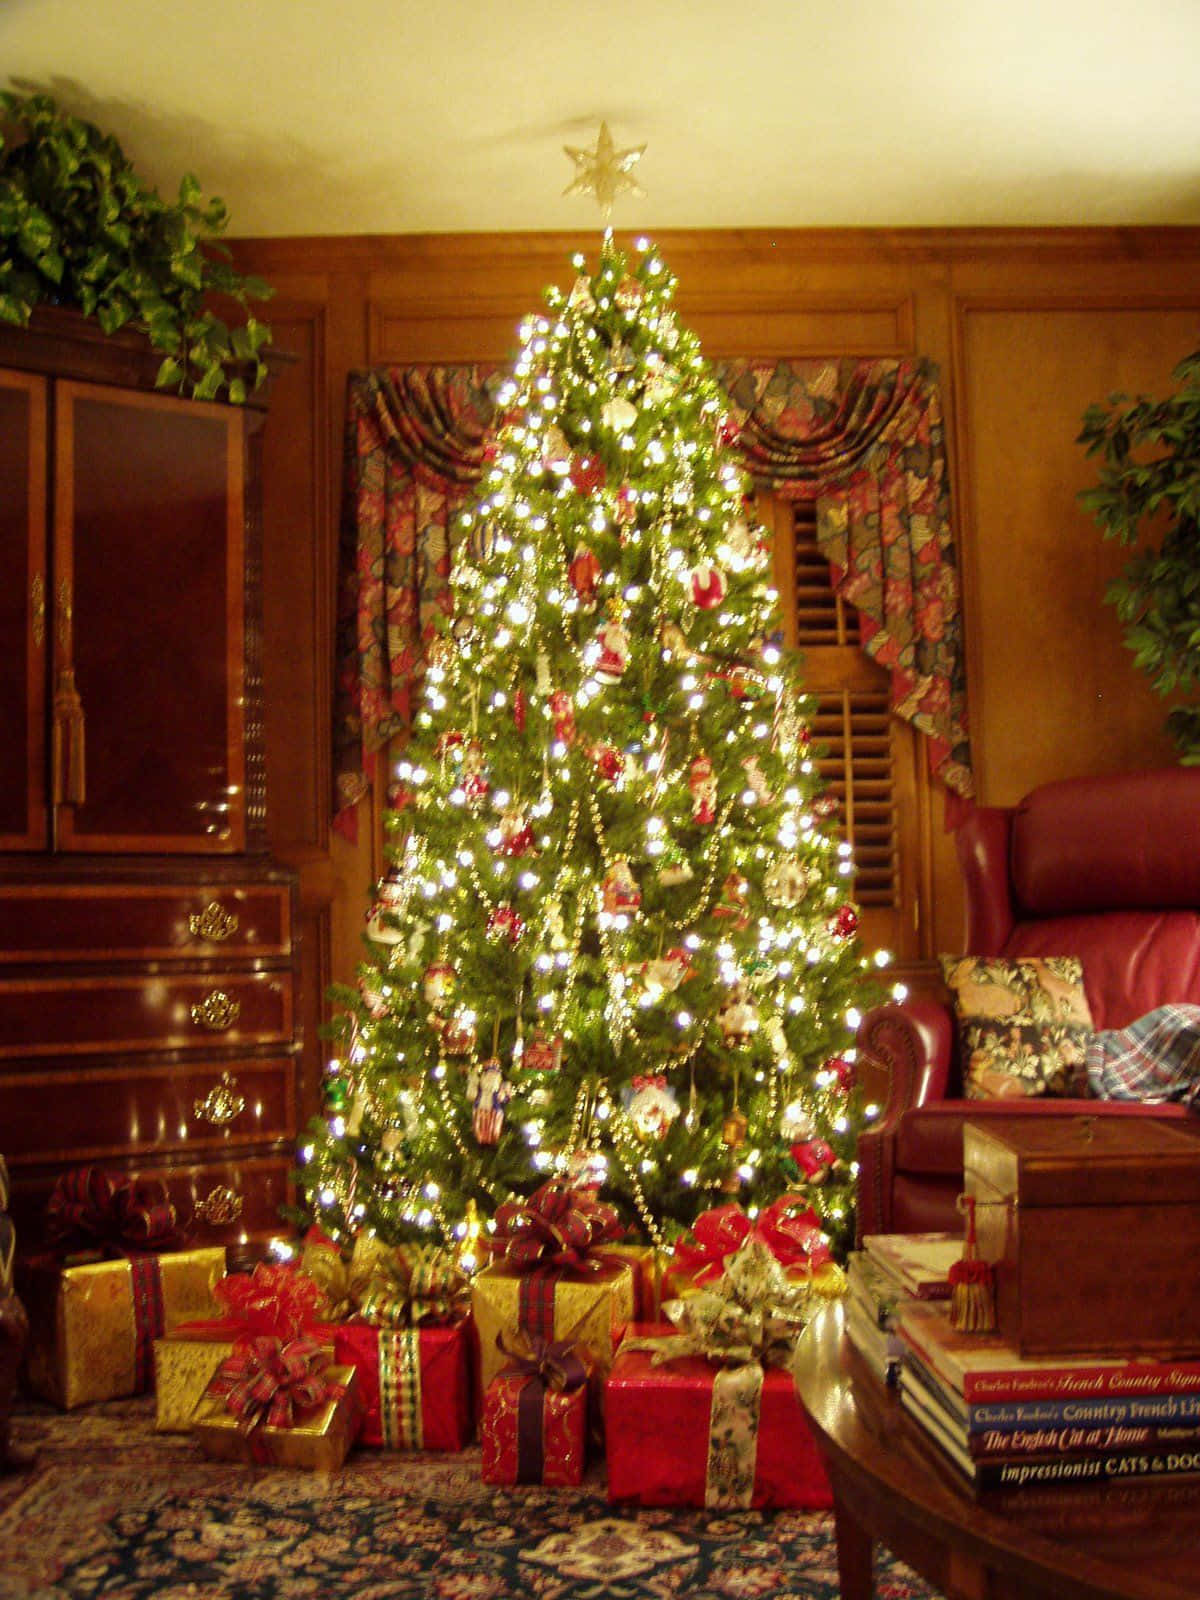 Feel the true spirit of Christmas with a beautiful holiday scene.